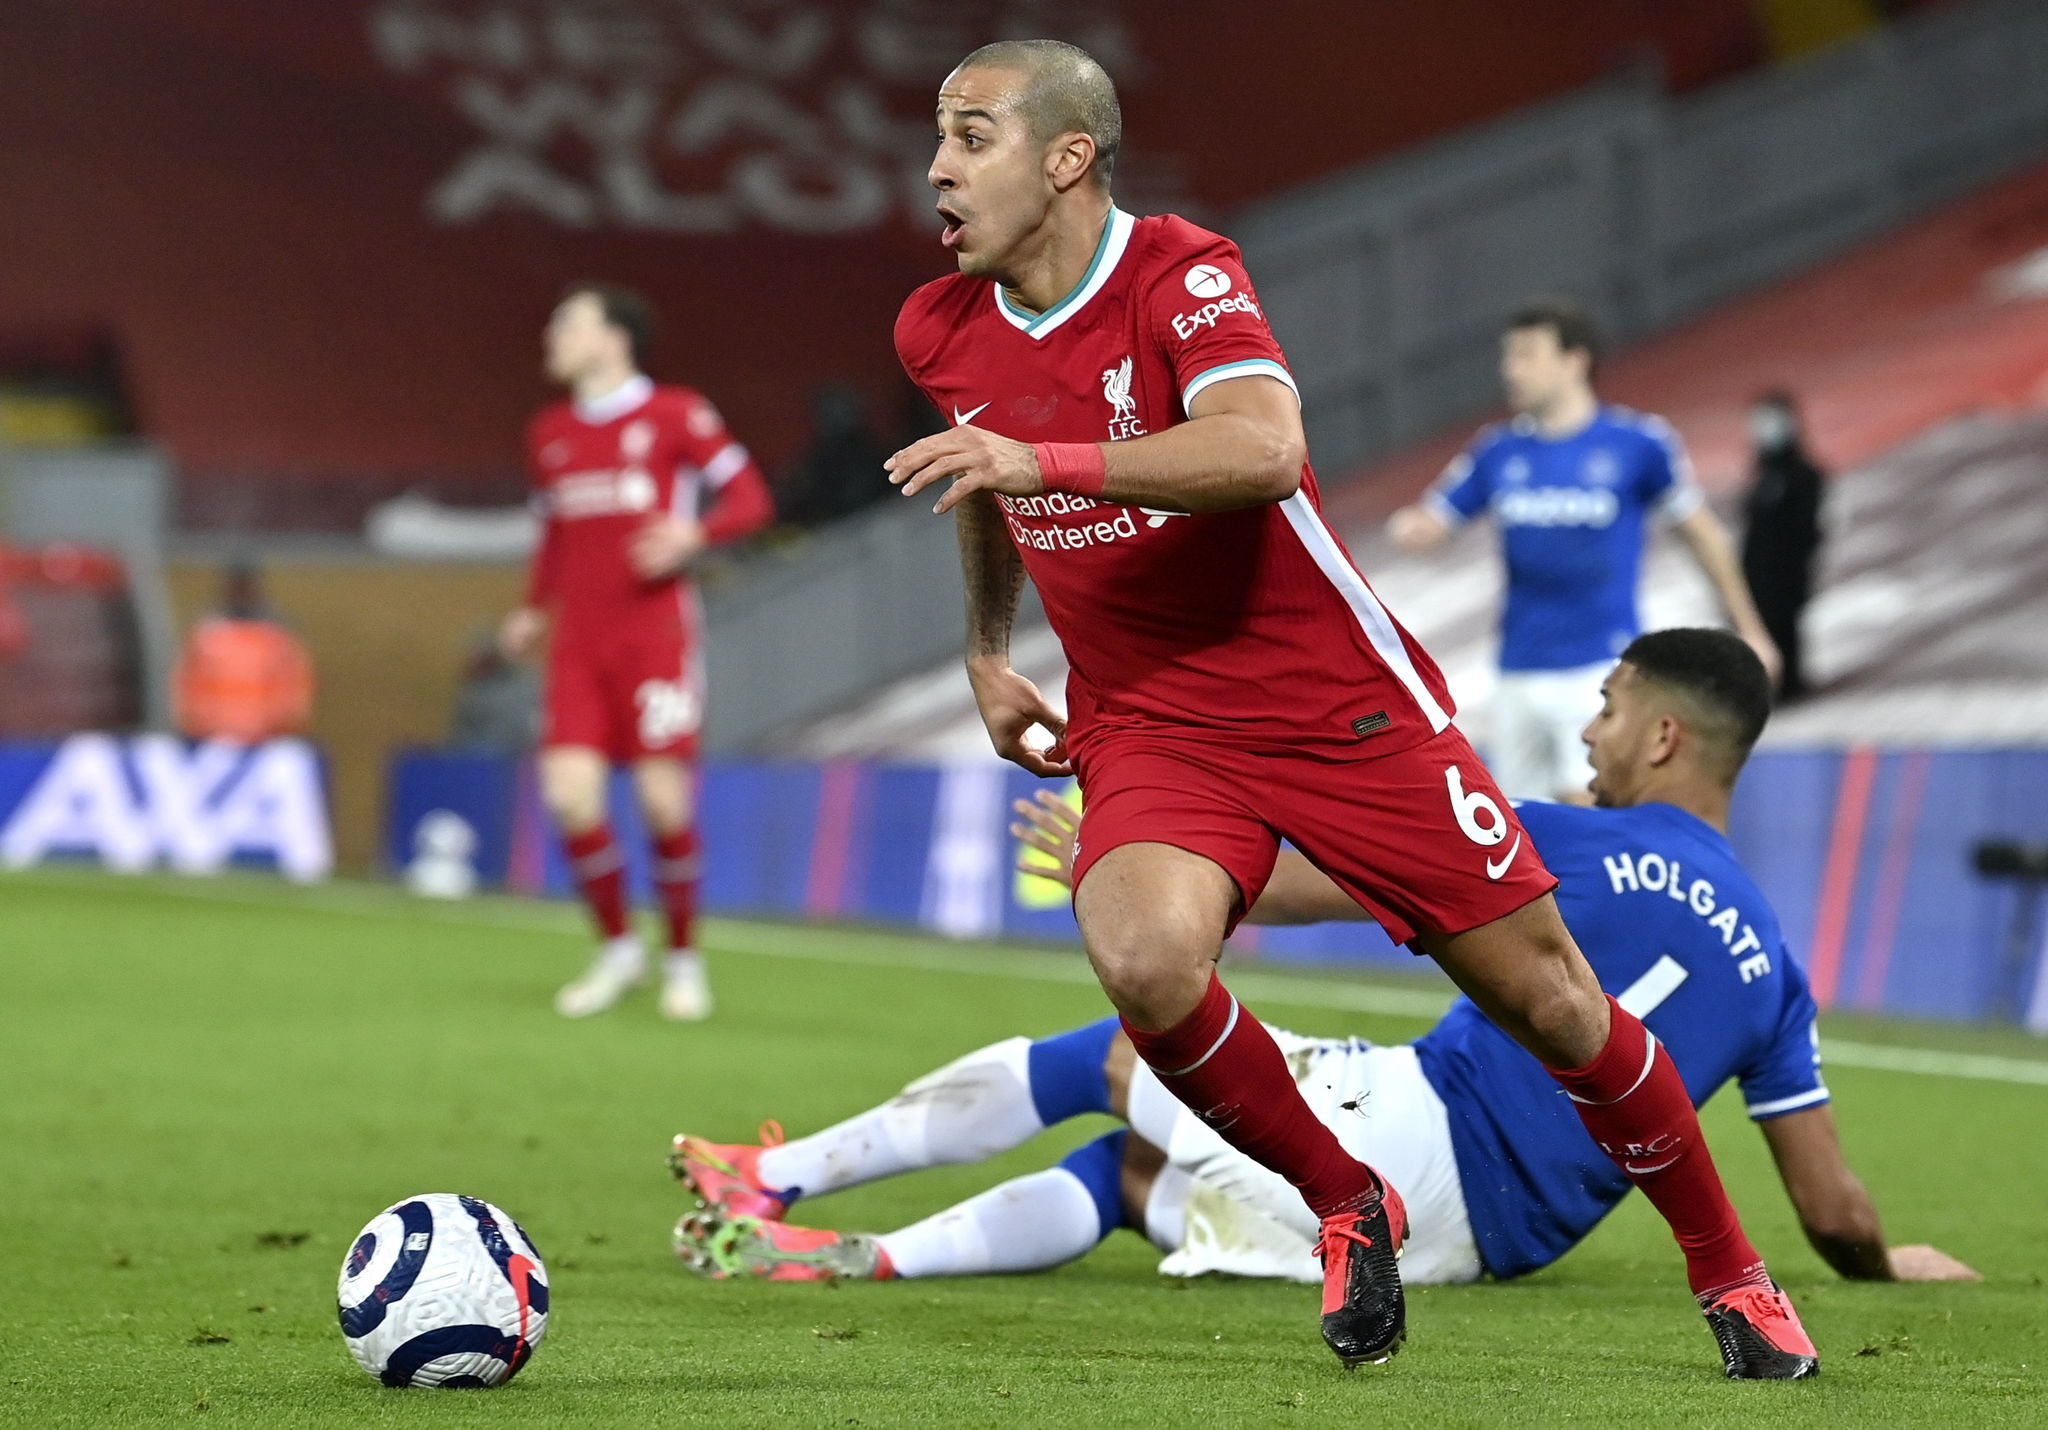 Liverpool (United Kingdom), 20/02/2021.- Liverpool's Thiago lt;HIT gt;Alcantara lt;/HIT gt; in action during the English Premier League soccer match between Liverpool FC and Everton FC in Liverpool, Britain, 20 February 2021. (Reino Unido) EFE/EPA/Paul Ellis / POOL EDITORIAL USE ONLY. No use with unauthorized audio, video, data, fixture lists, club/league logos or 'live' services. Online in-match use limited to 120 images, no video emulation. No use in betting, games or single club/league/player publications